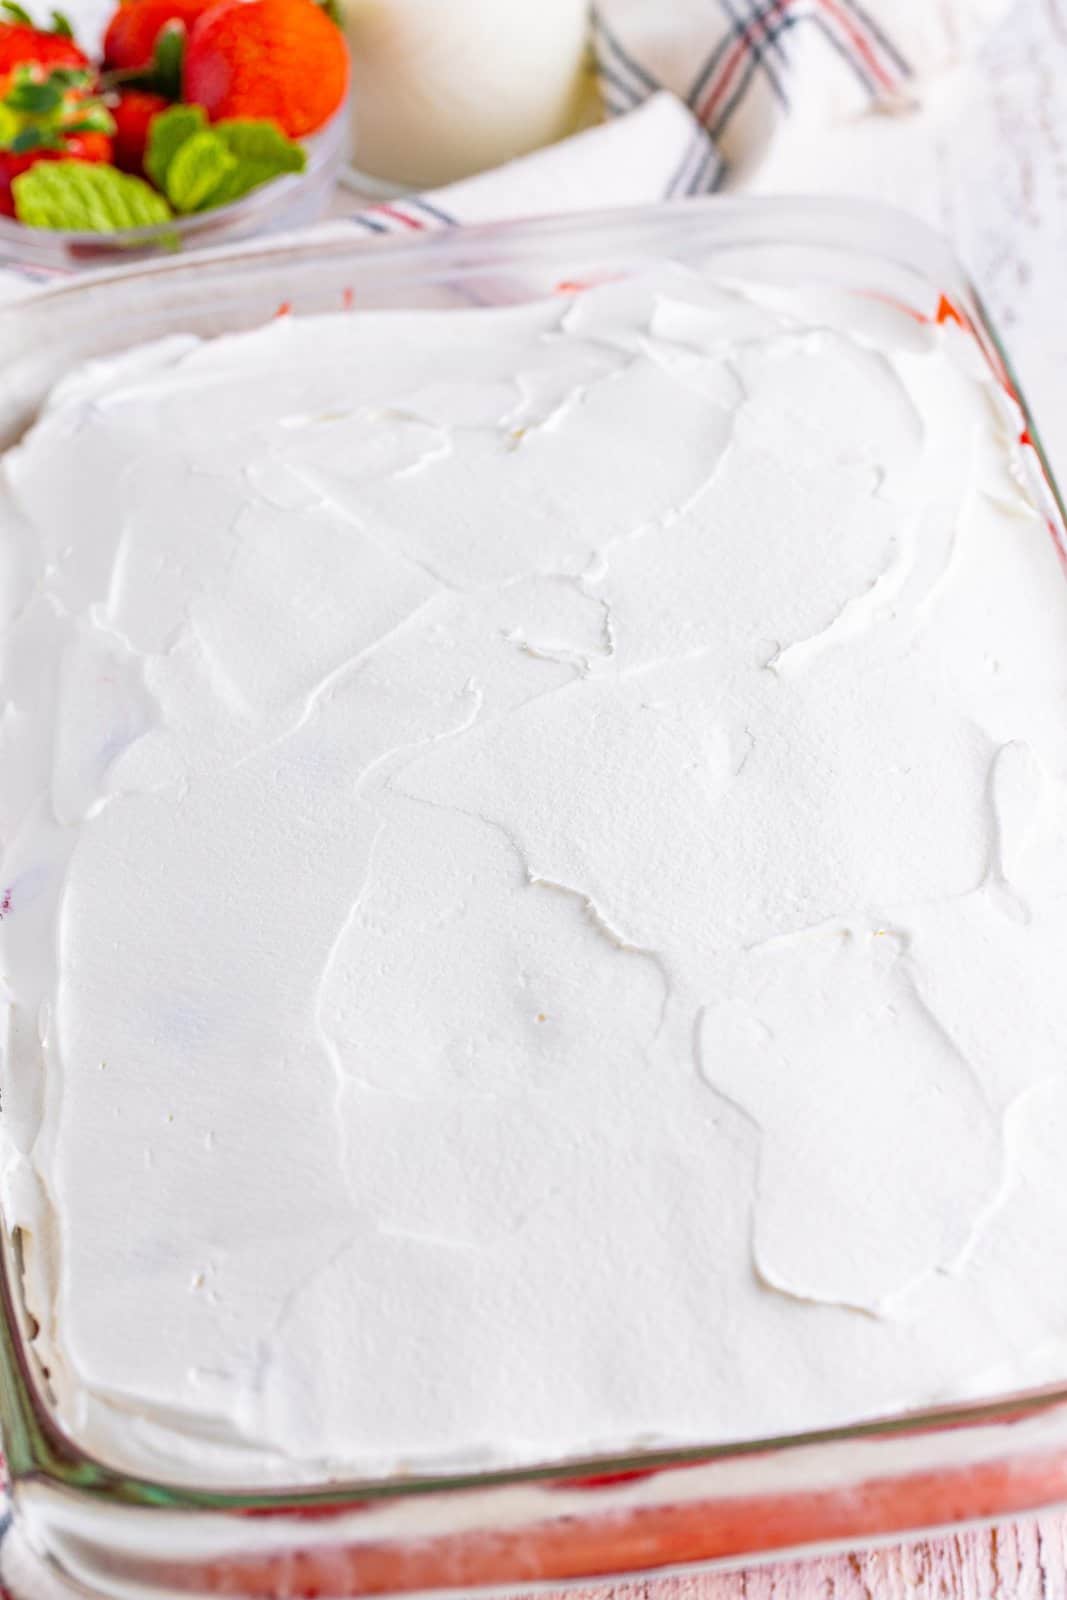 Whipped topping on a cake in a baking dish.